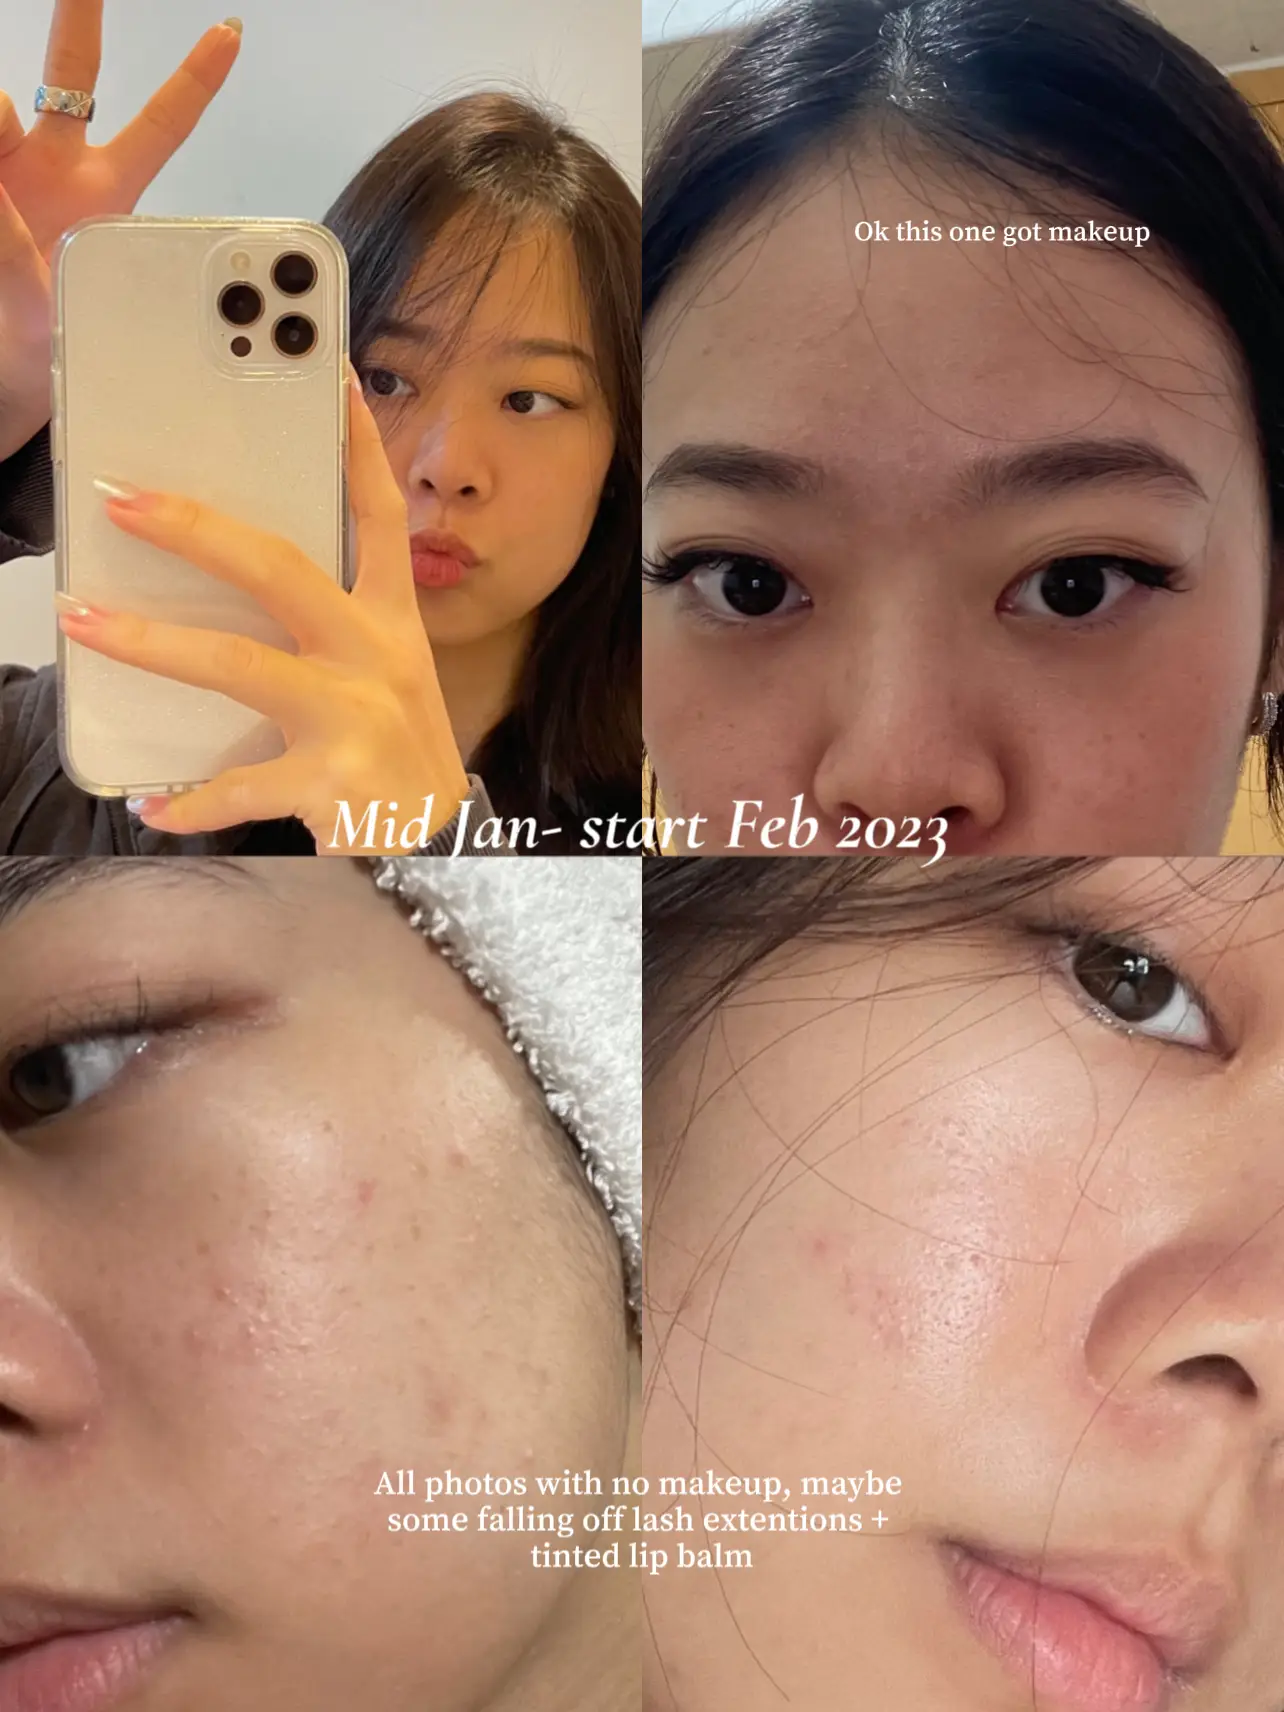 I finally cleared up my acne... 😭🧿's images(2)